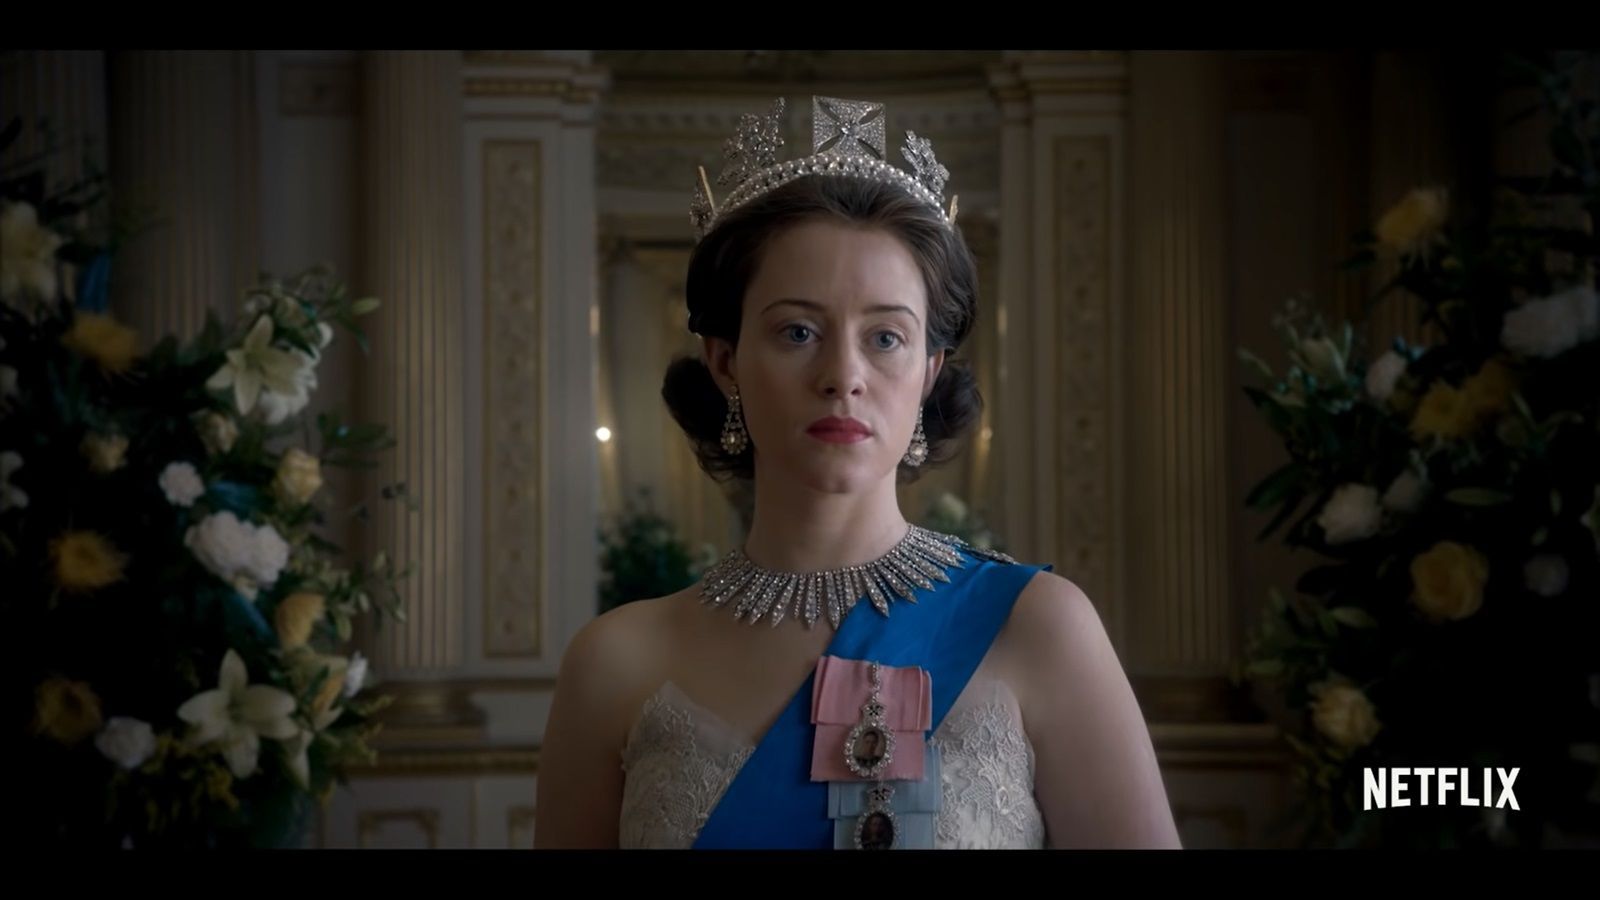 Claire Foy, "The Crown" s. 1-2, 2016-2017. 